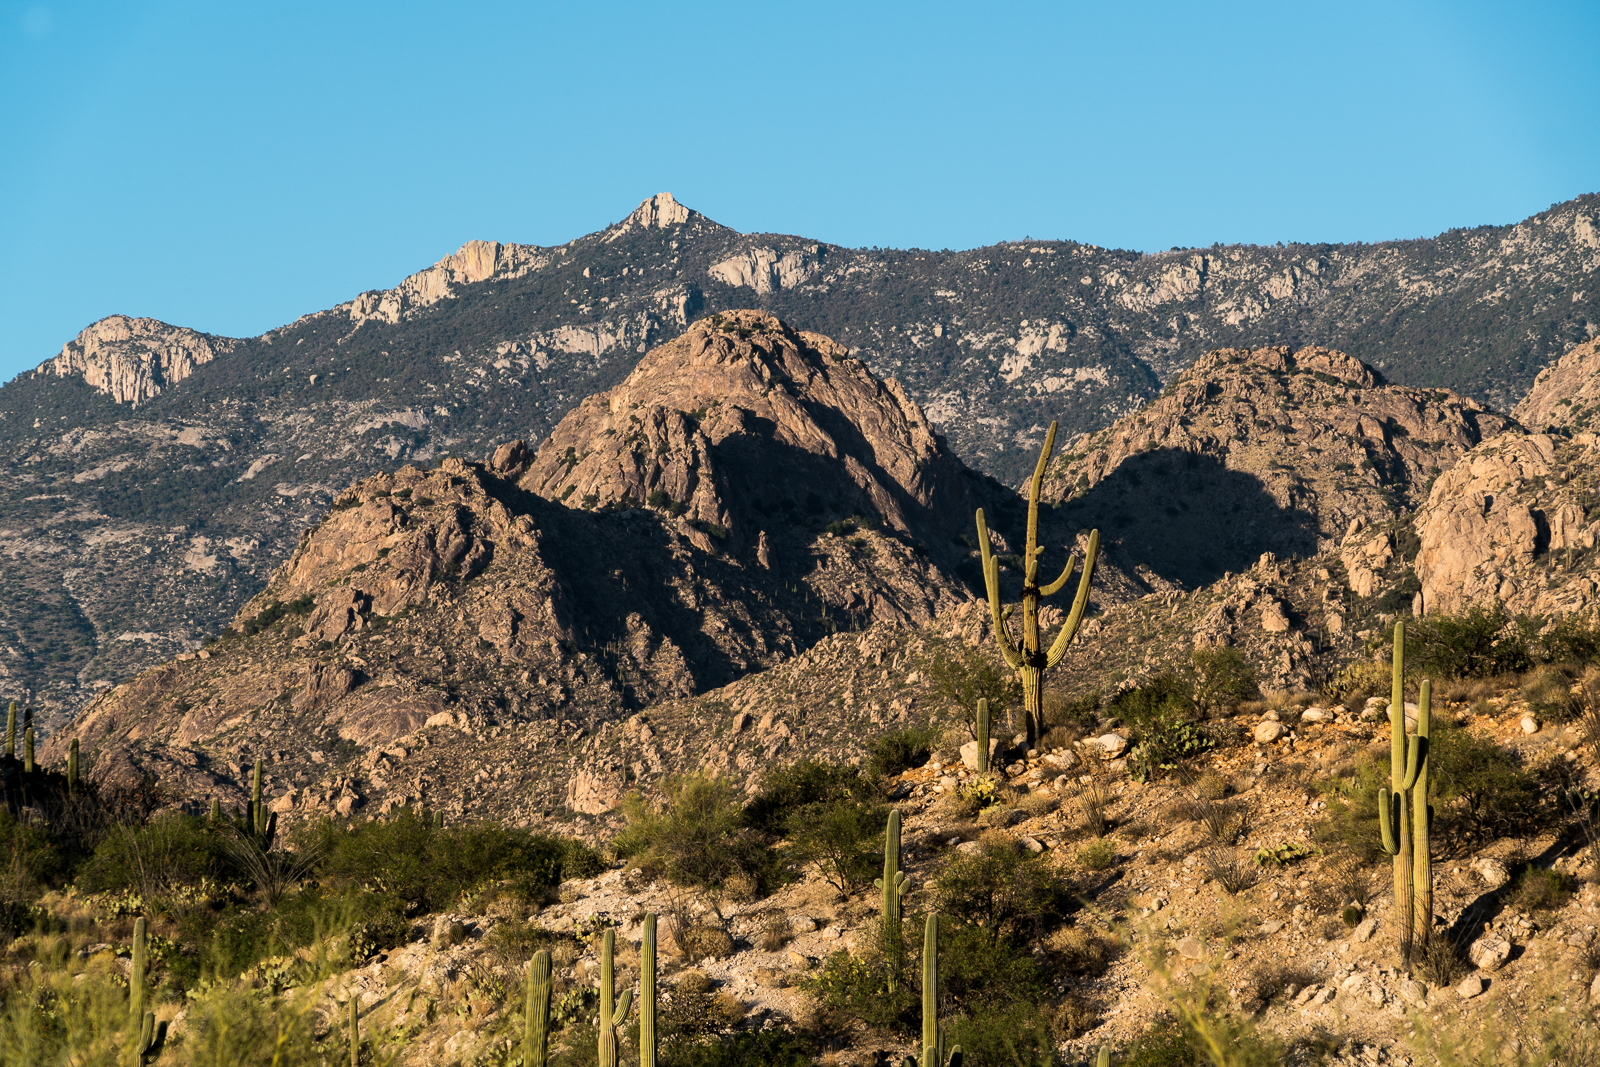 Golder Dome - front - and Samaniego Ridge and Peak - back - from Alamo Canyon in Santa Catalina State Park. April 2016.